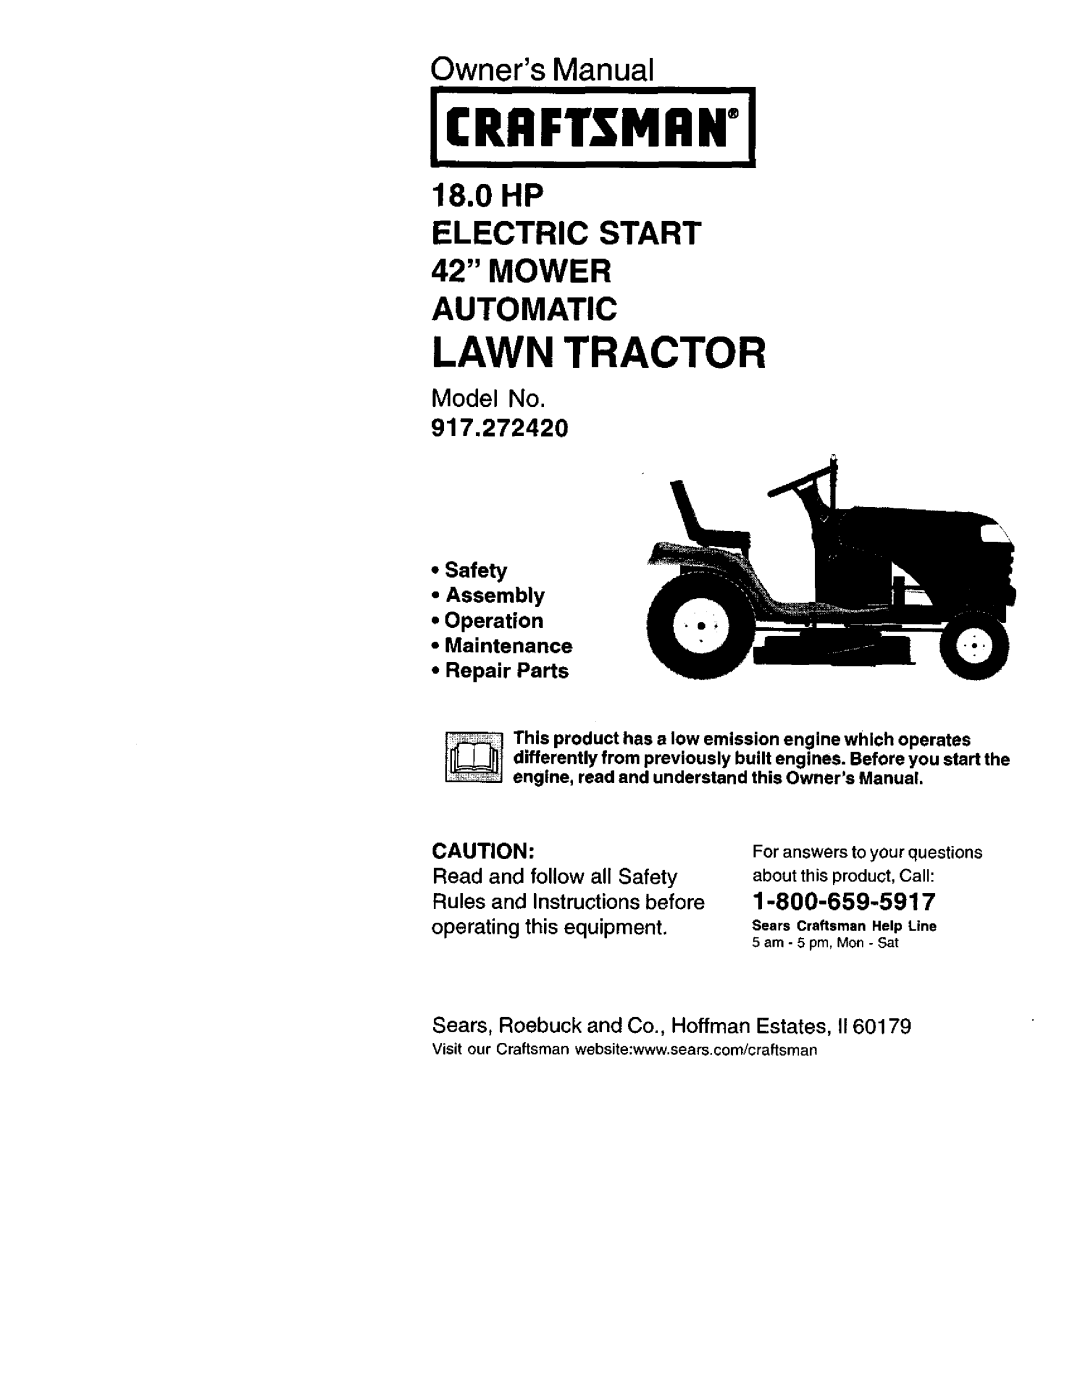 Craftsman 917.27242 owner manual Model No, •Safety •Assembly •Operation •Maintenance, •Repair Parts, Read, Rules 